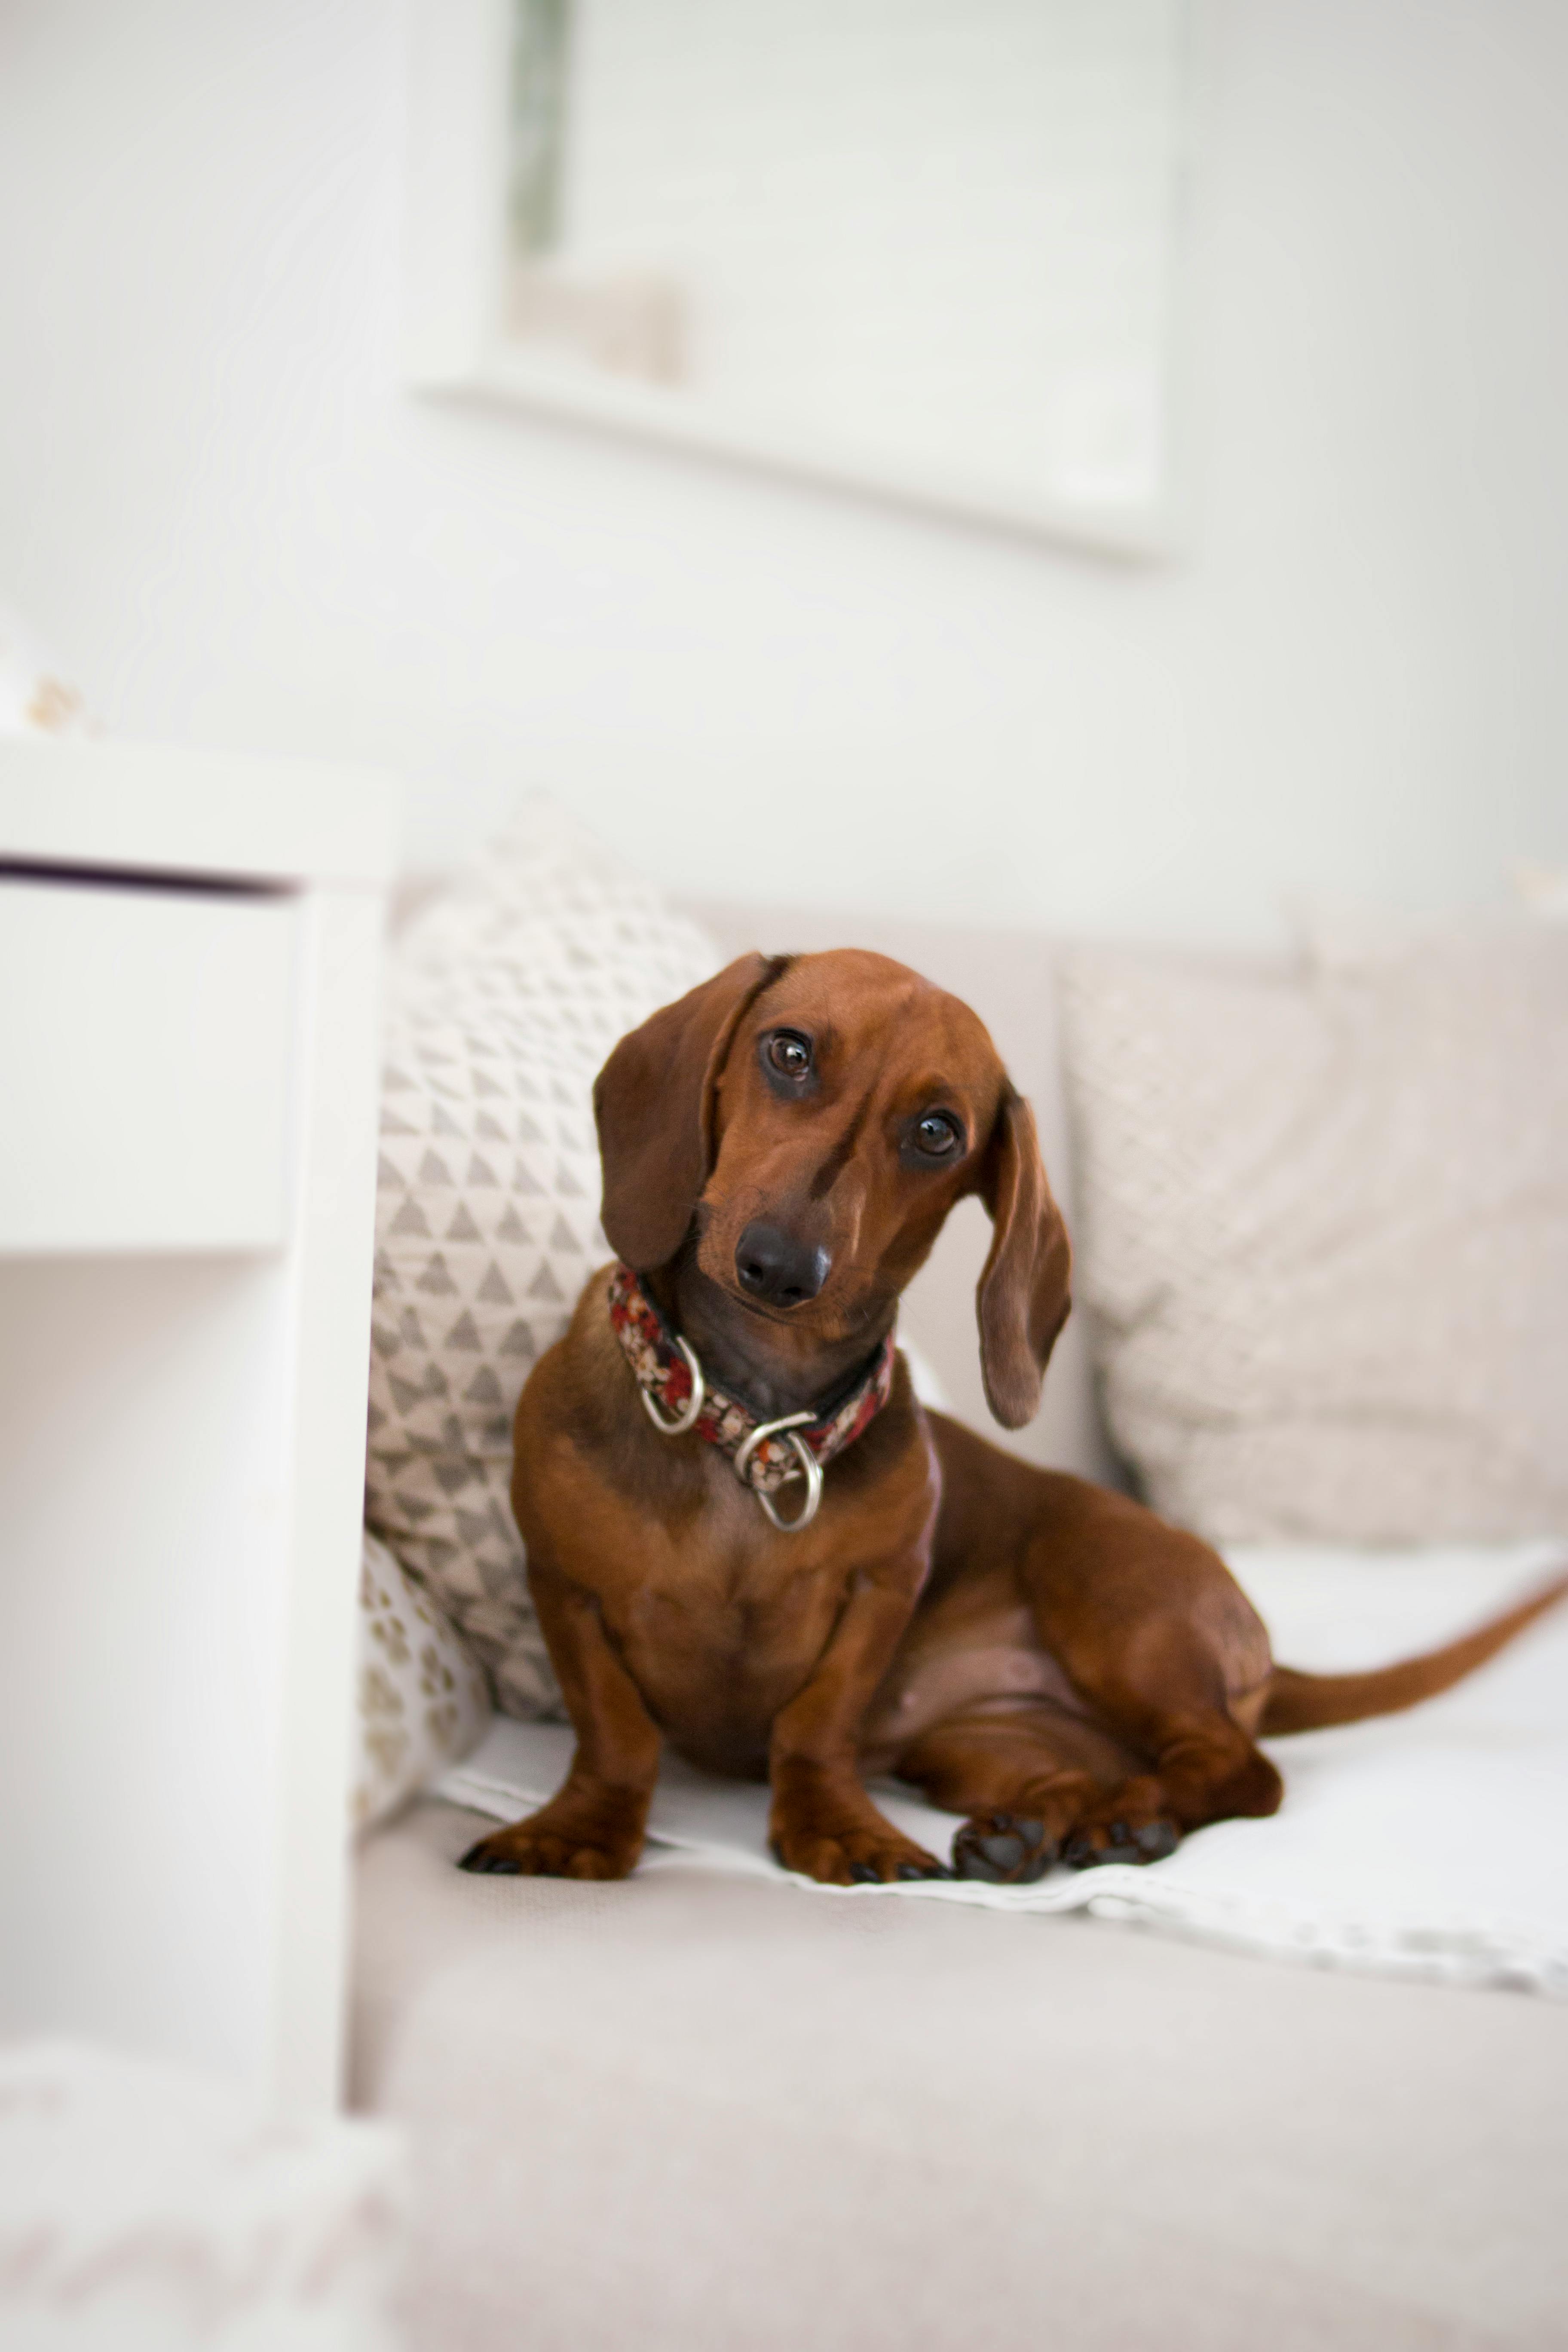 How To Prevent Bowel Problems In Dachshunds